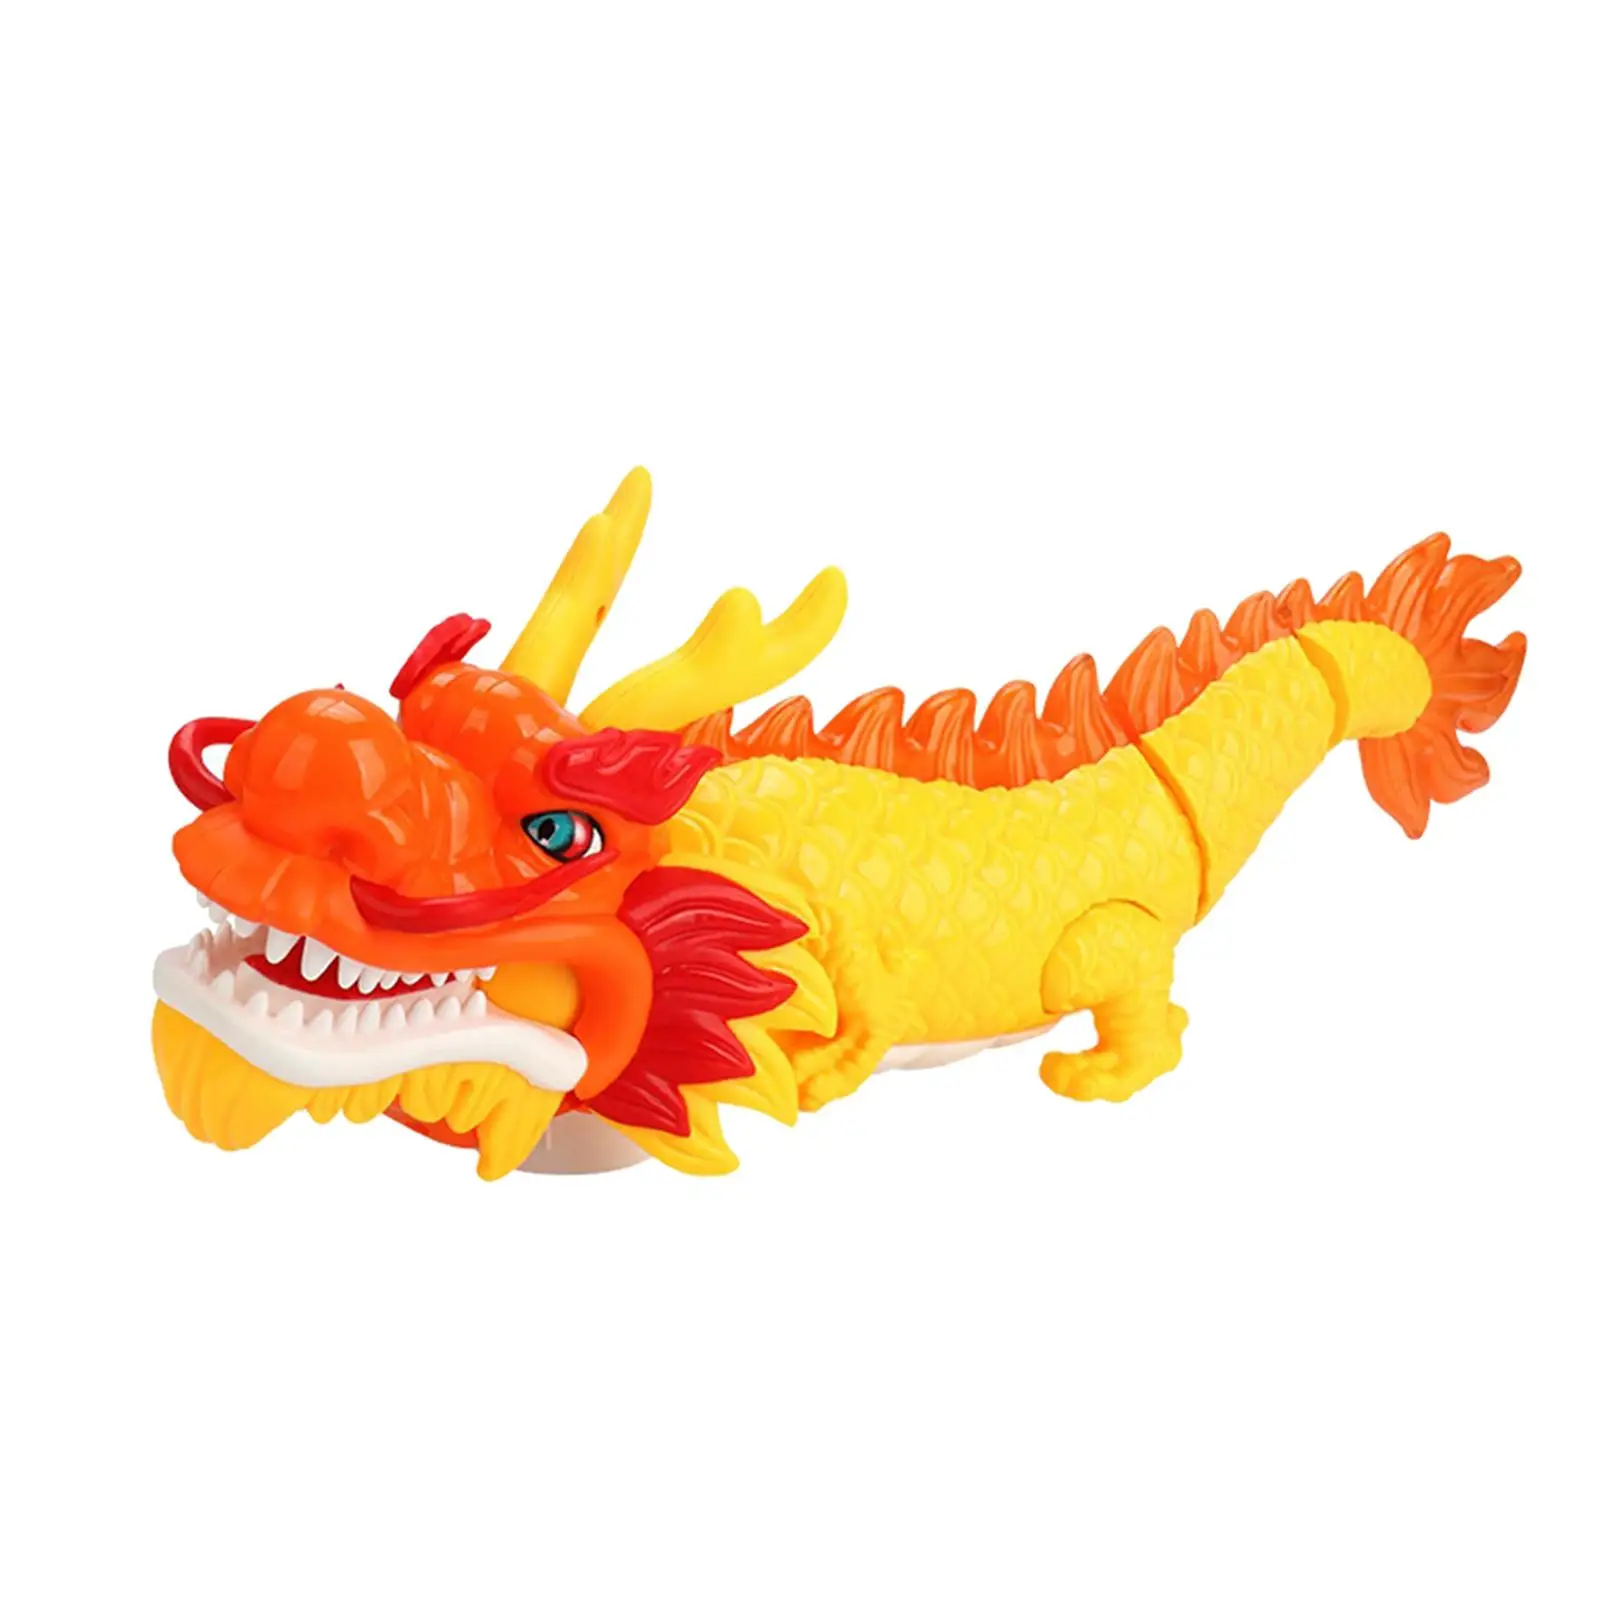 Eletric Dragon Toy Creative Walking Dragon Toy Gifts Animal Birthday Gifts Crawling Toy for Kid Girls Adults Children Age 8-12